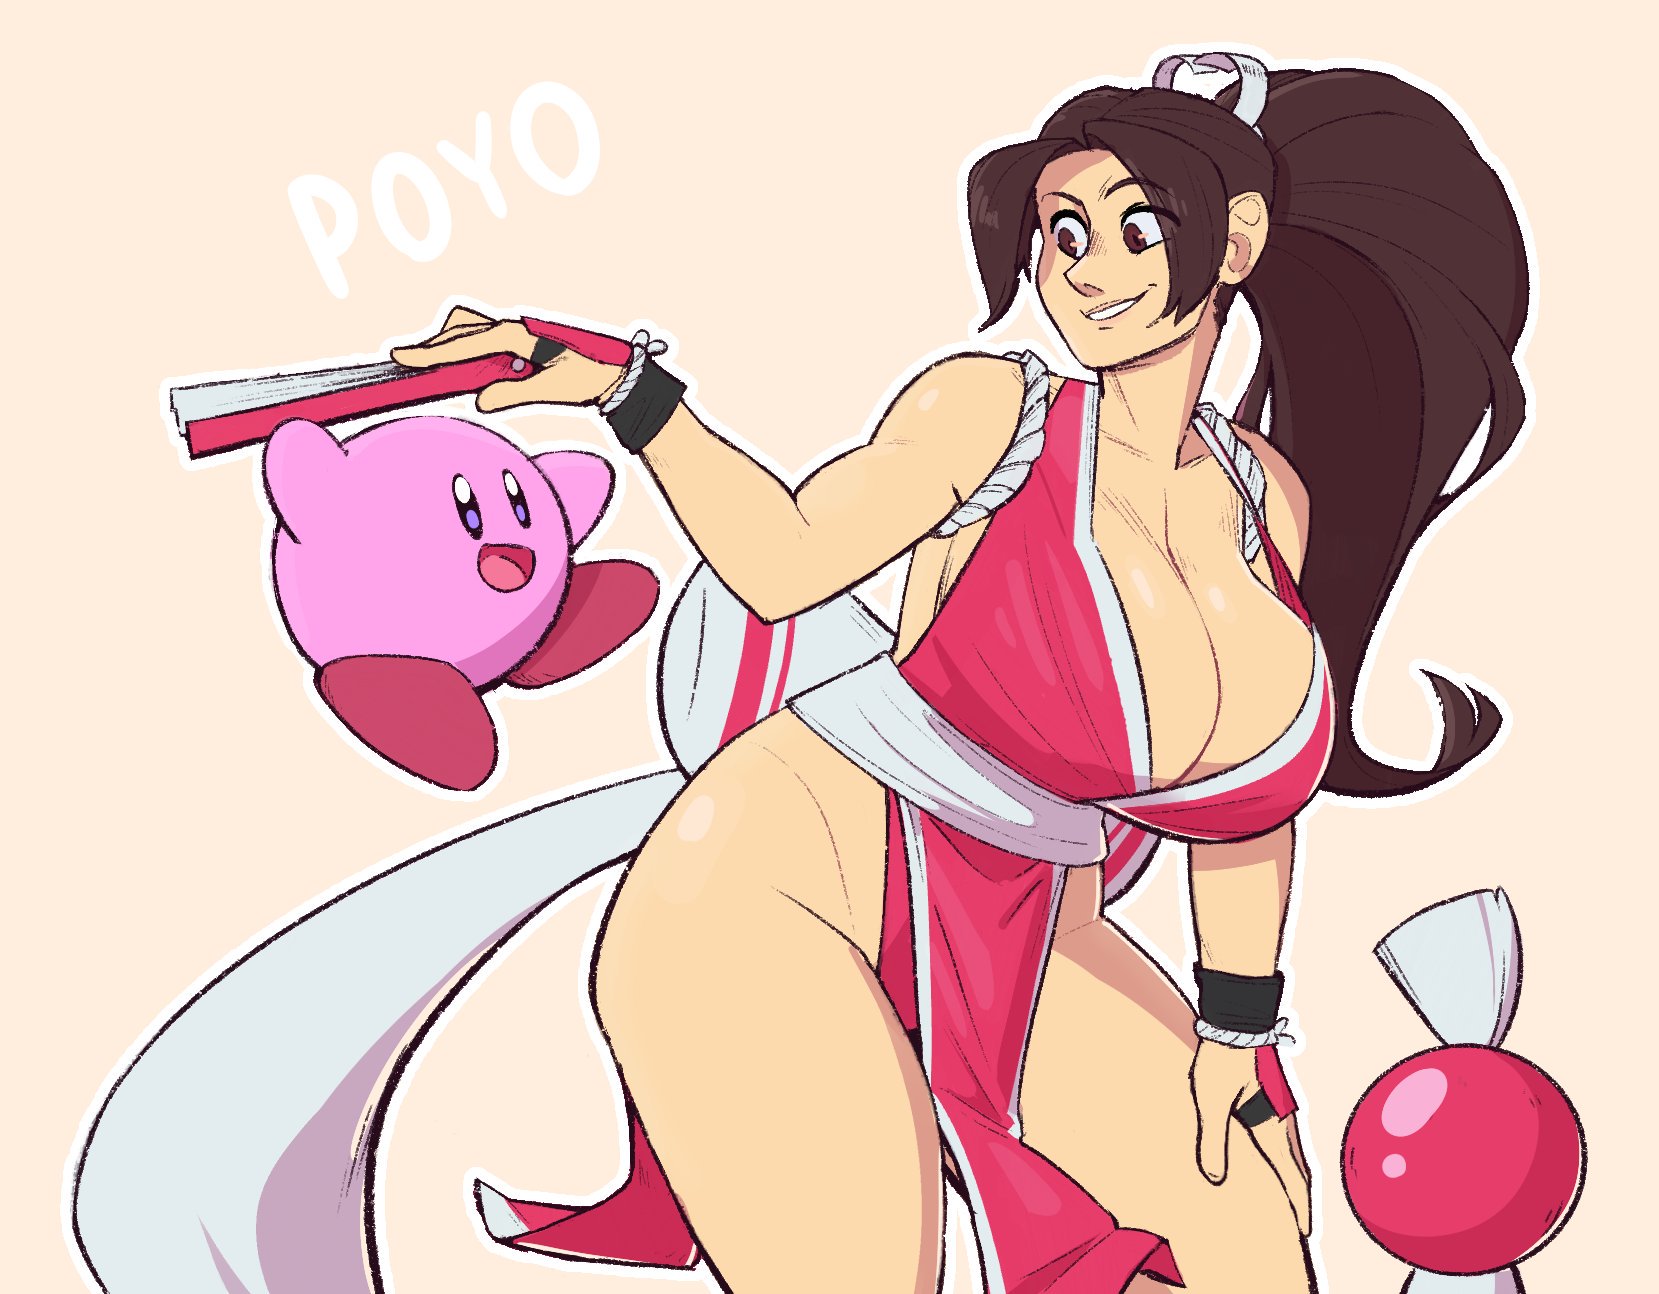 The Dansome on X: A bit late to the Mai Shiranui but she seems pretty neat  so I decided to draw two cute characters today t.coqJPz7MZLFX  X